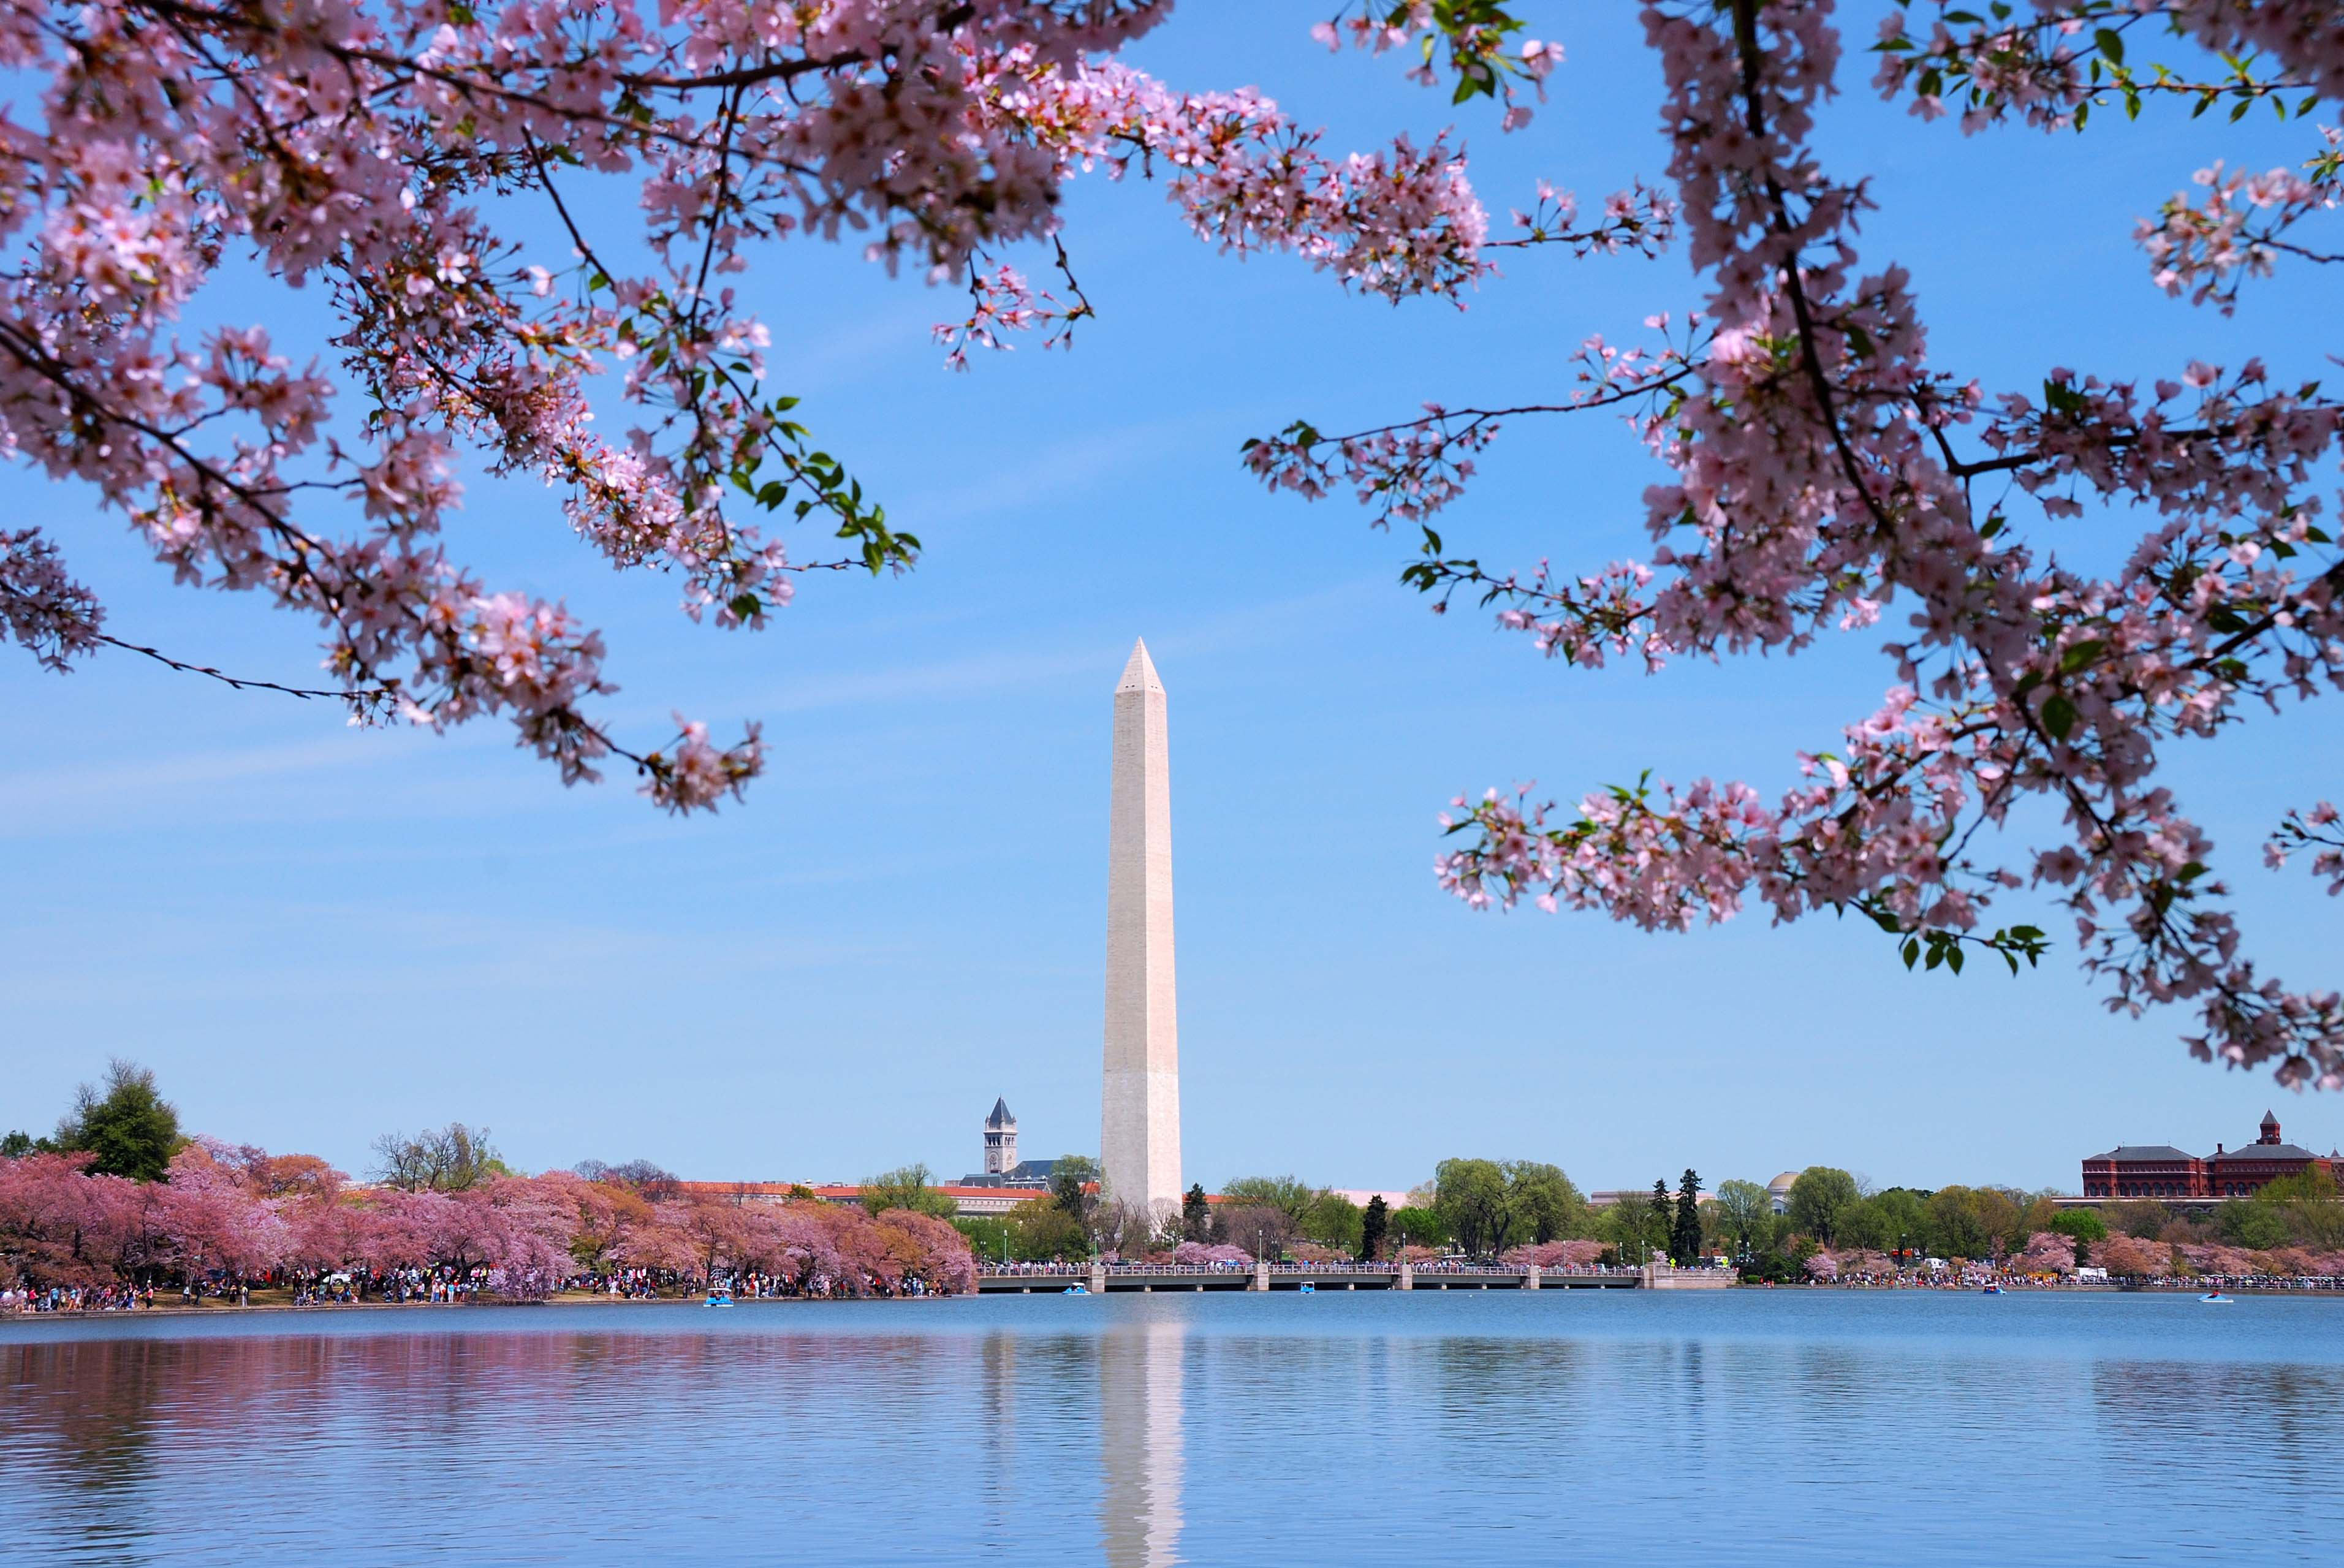 Pictures Of Cherry Blossoms In Washington Dc Where To See Amazing